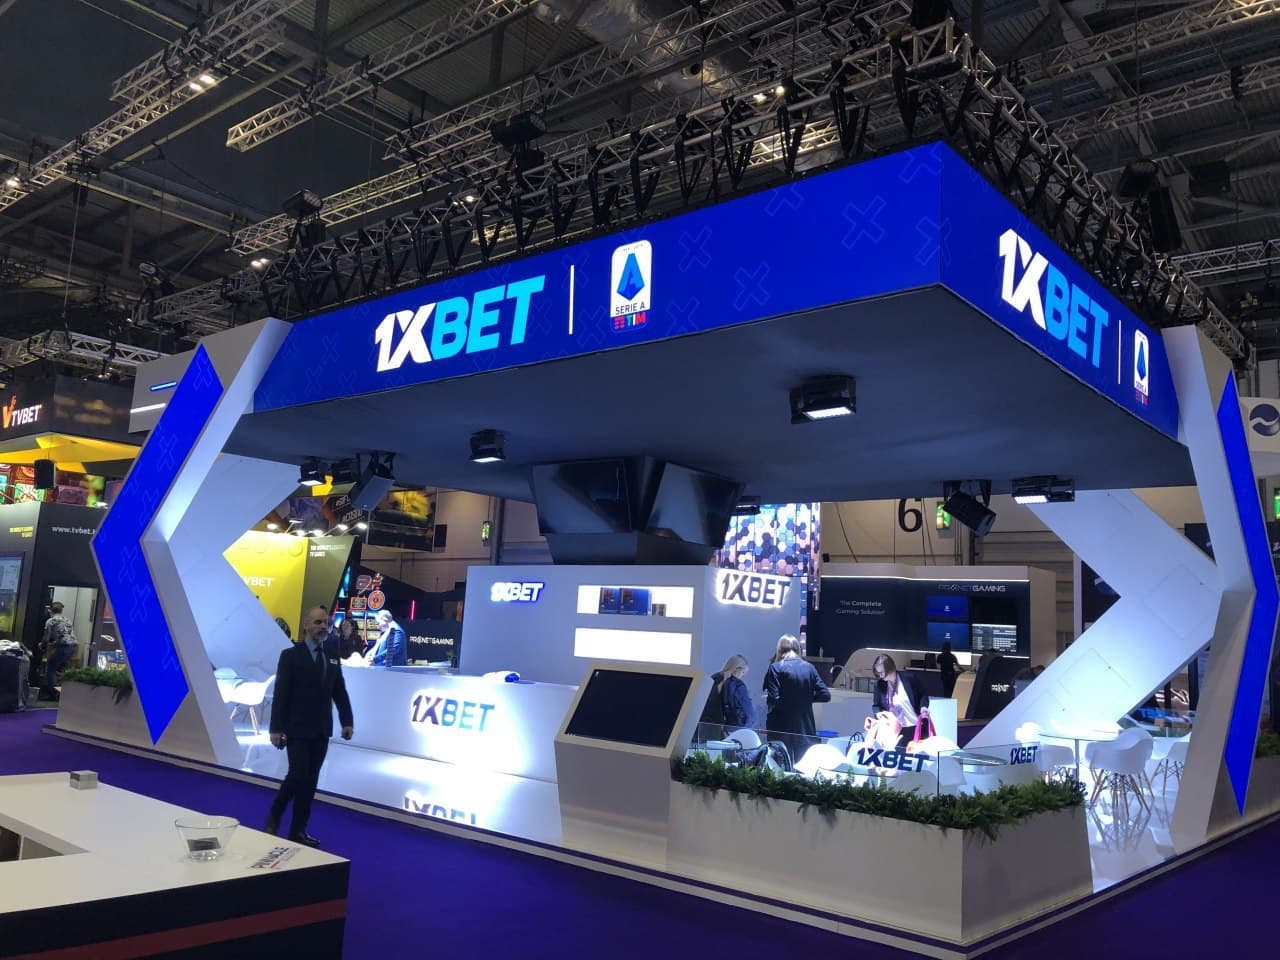 1xBet booth at a gaming conference